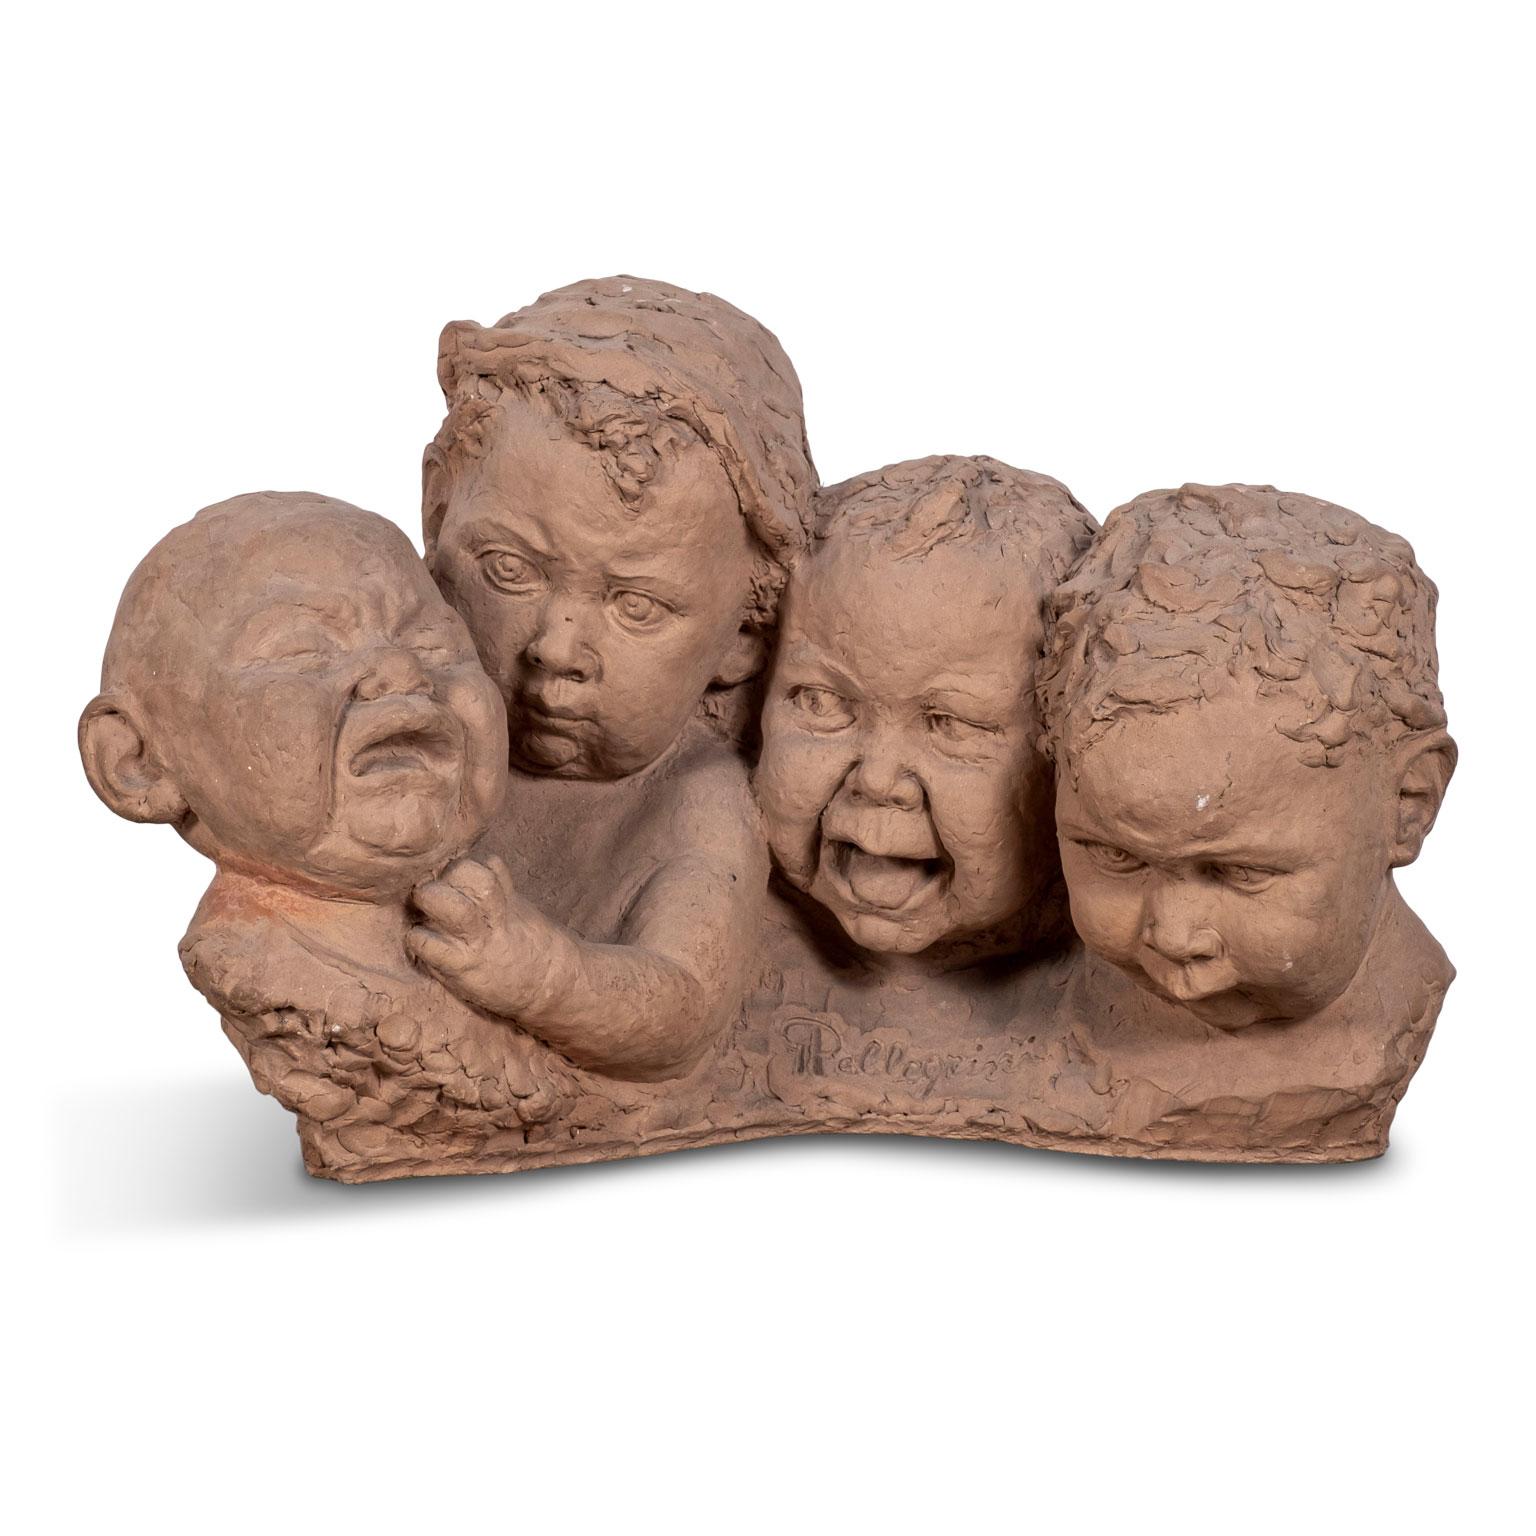 Italian terracotta bust of crying babies, signed 